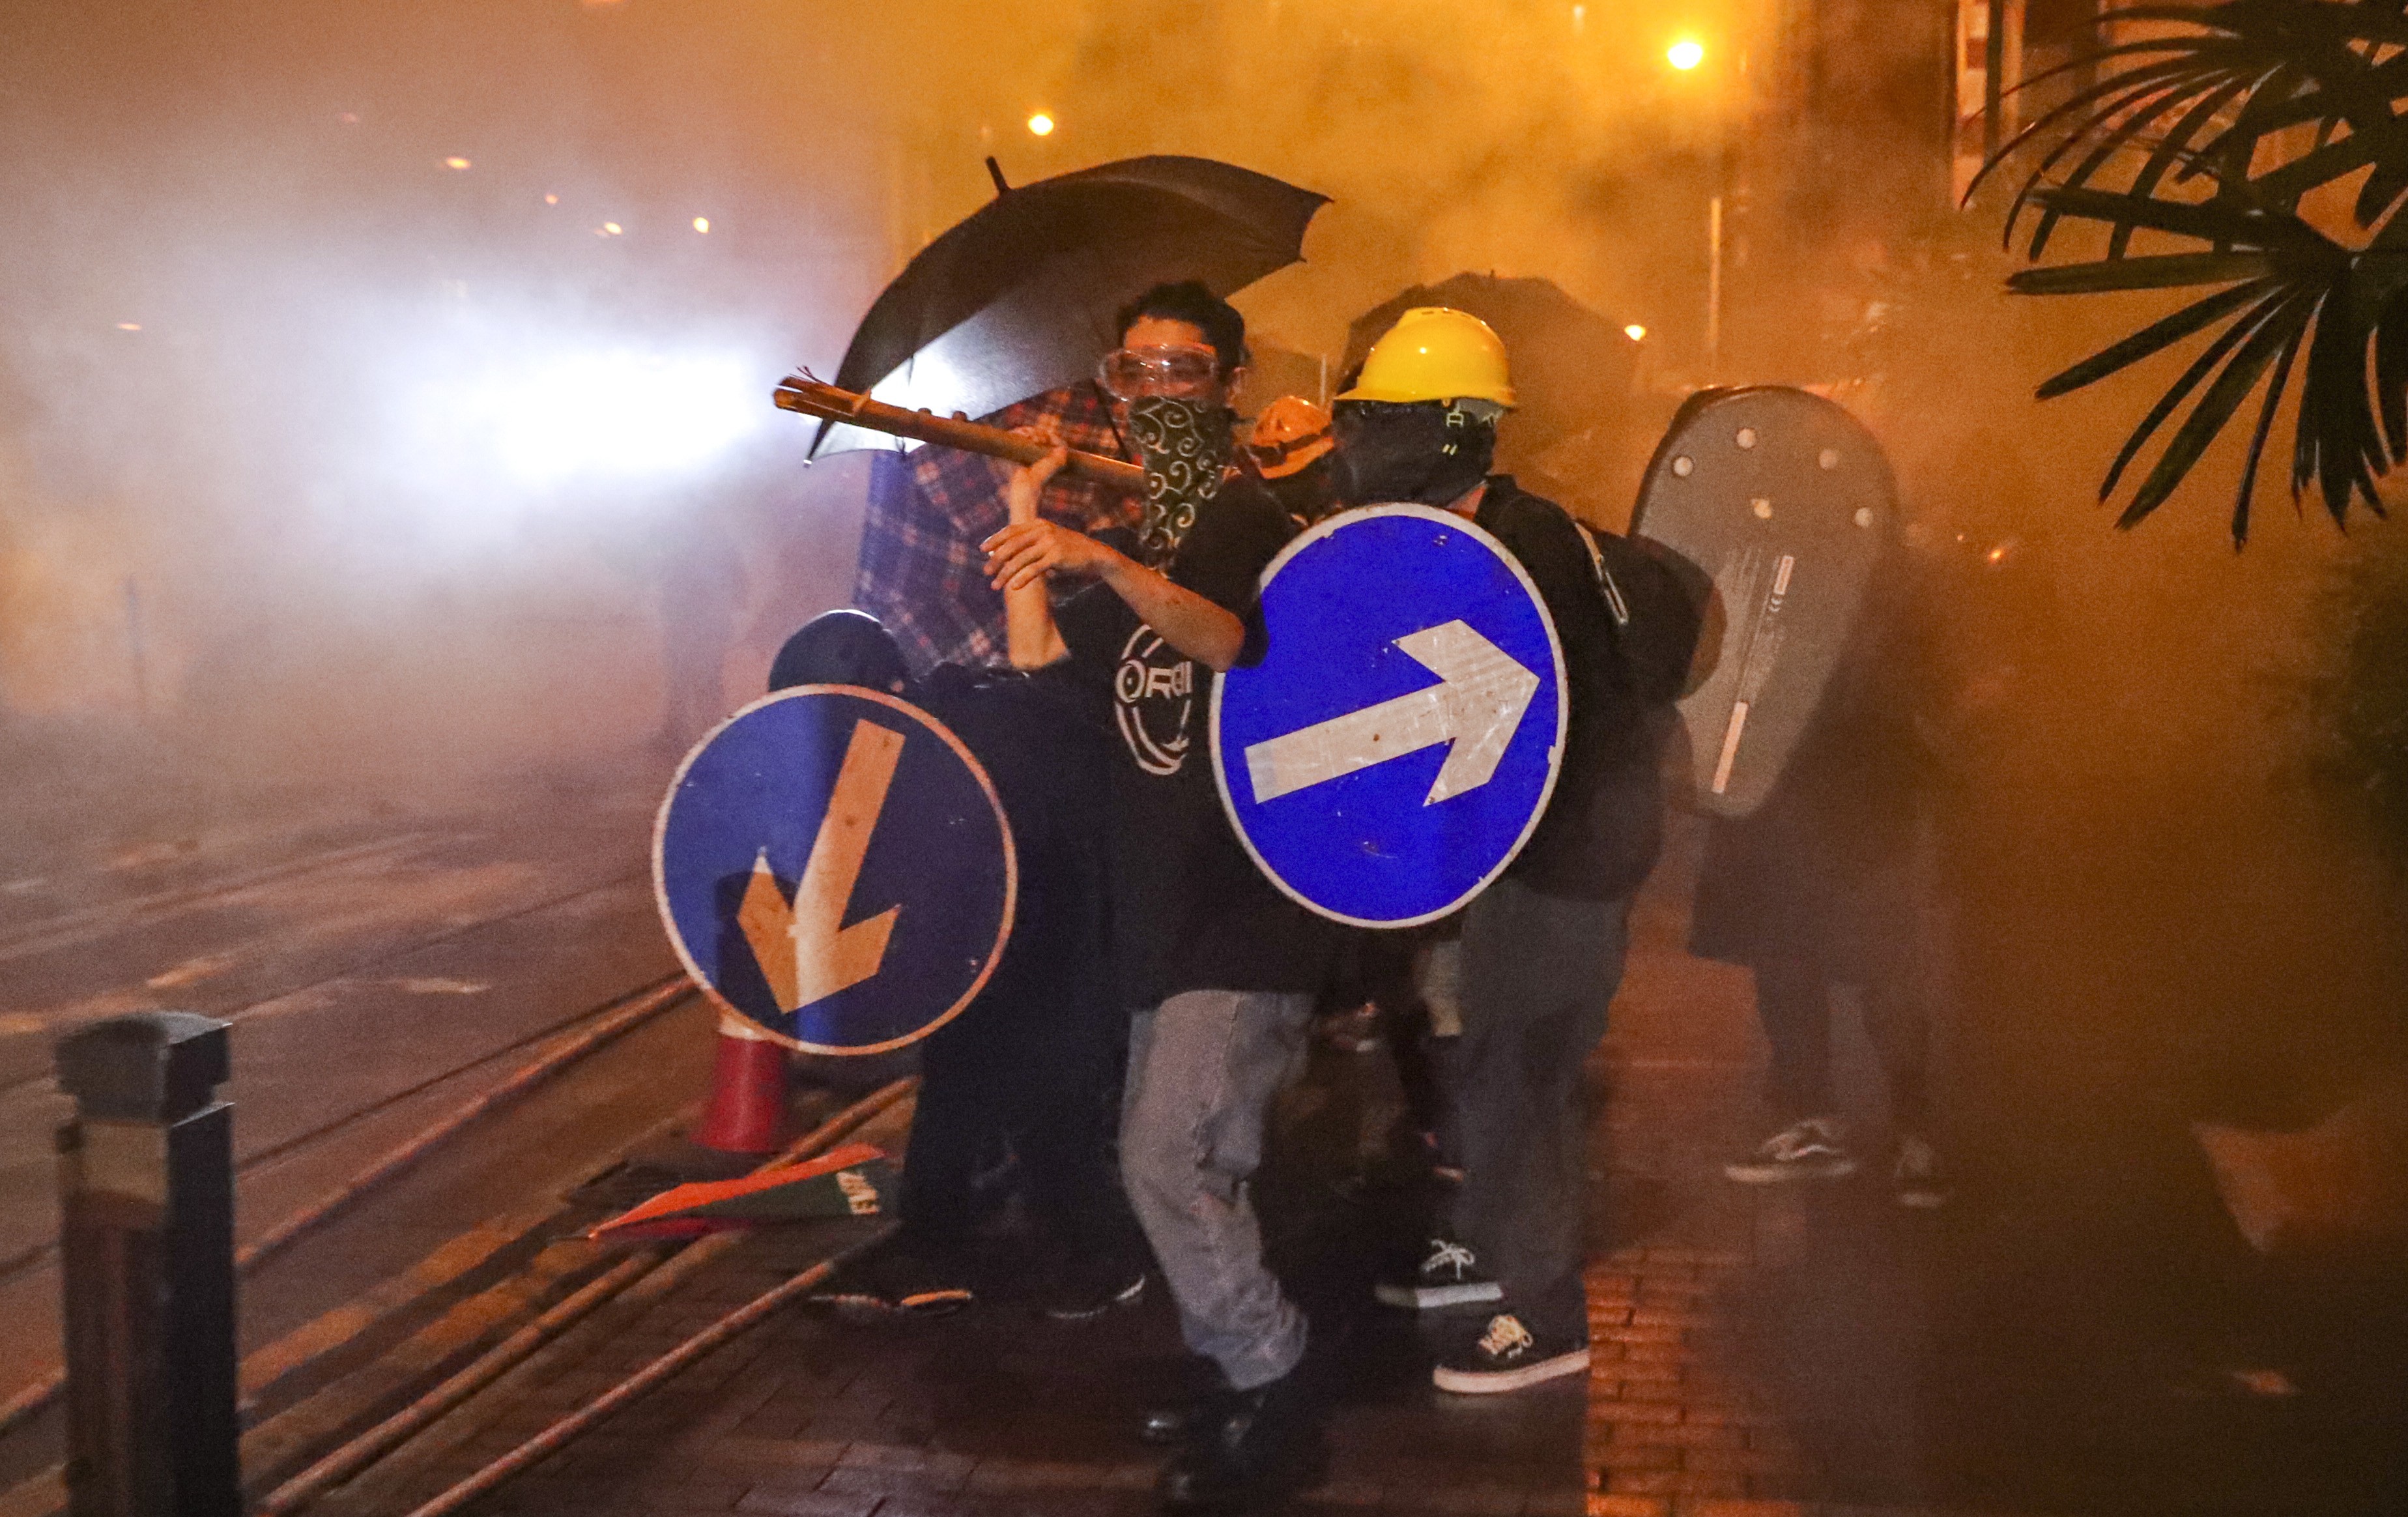 Protesters on Sunday fight through tear gas as they clash with riot police near Beijing’s liaison office in Sai Ying Pun. Photo: Edmond So